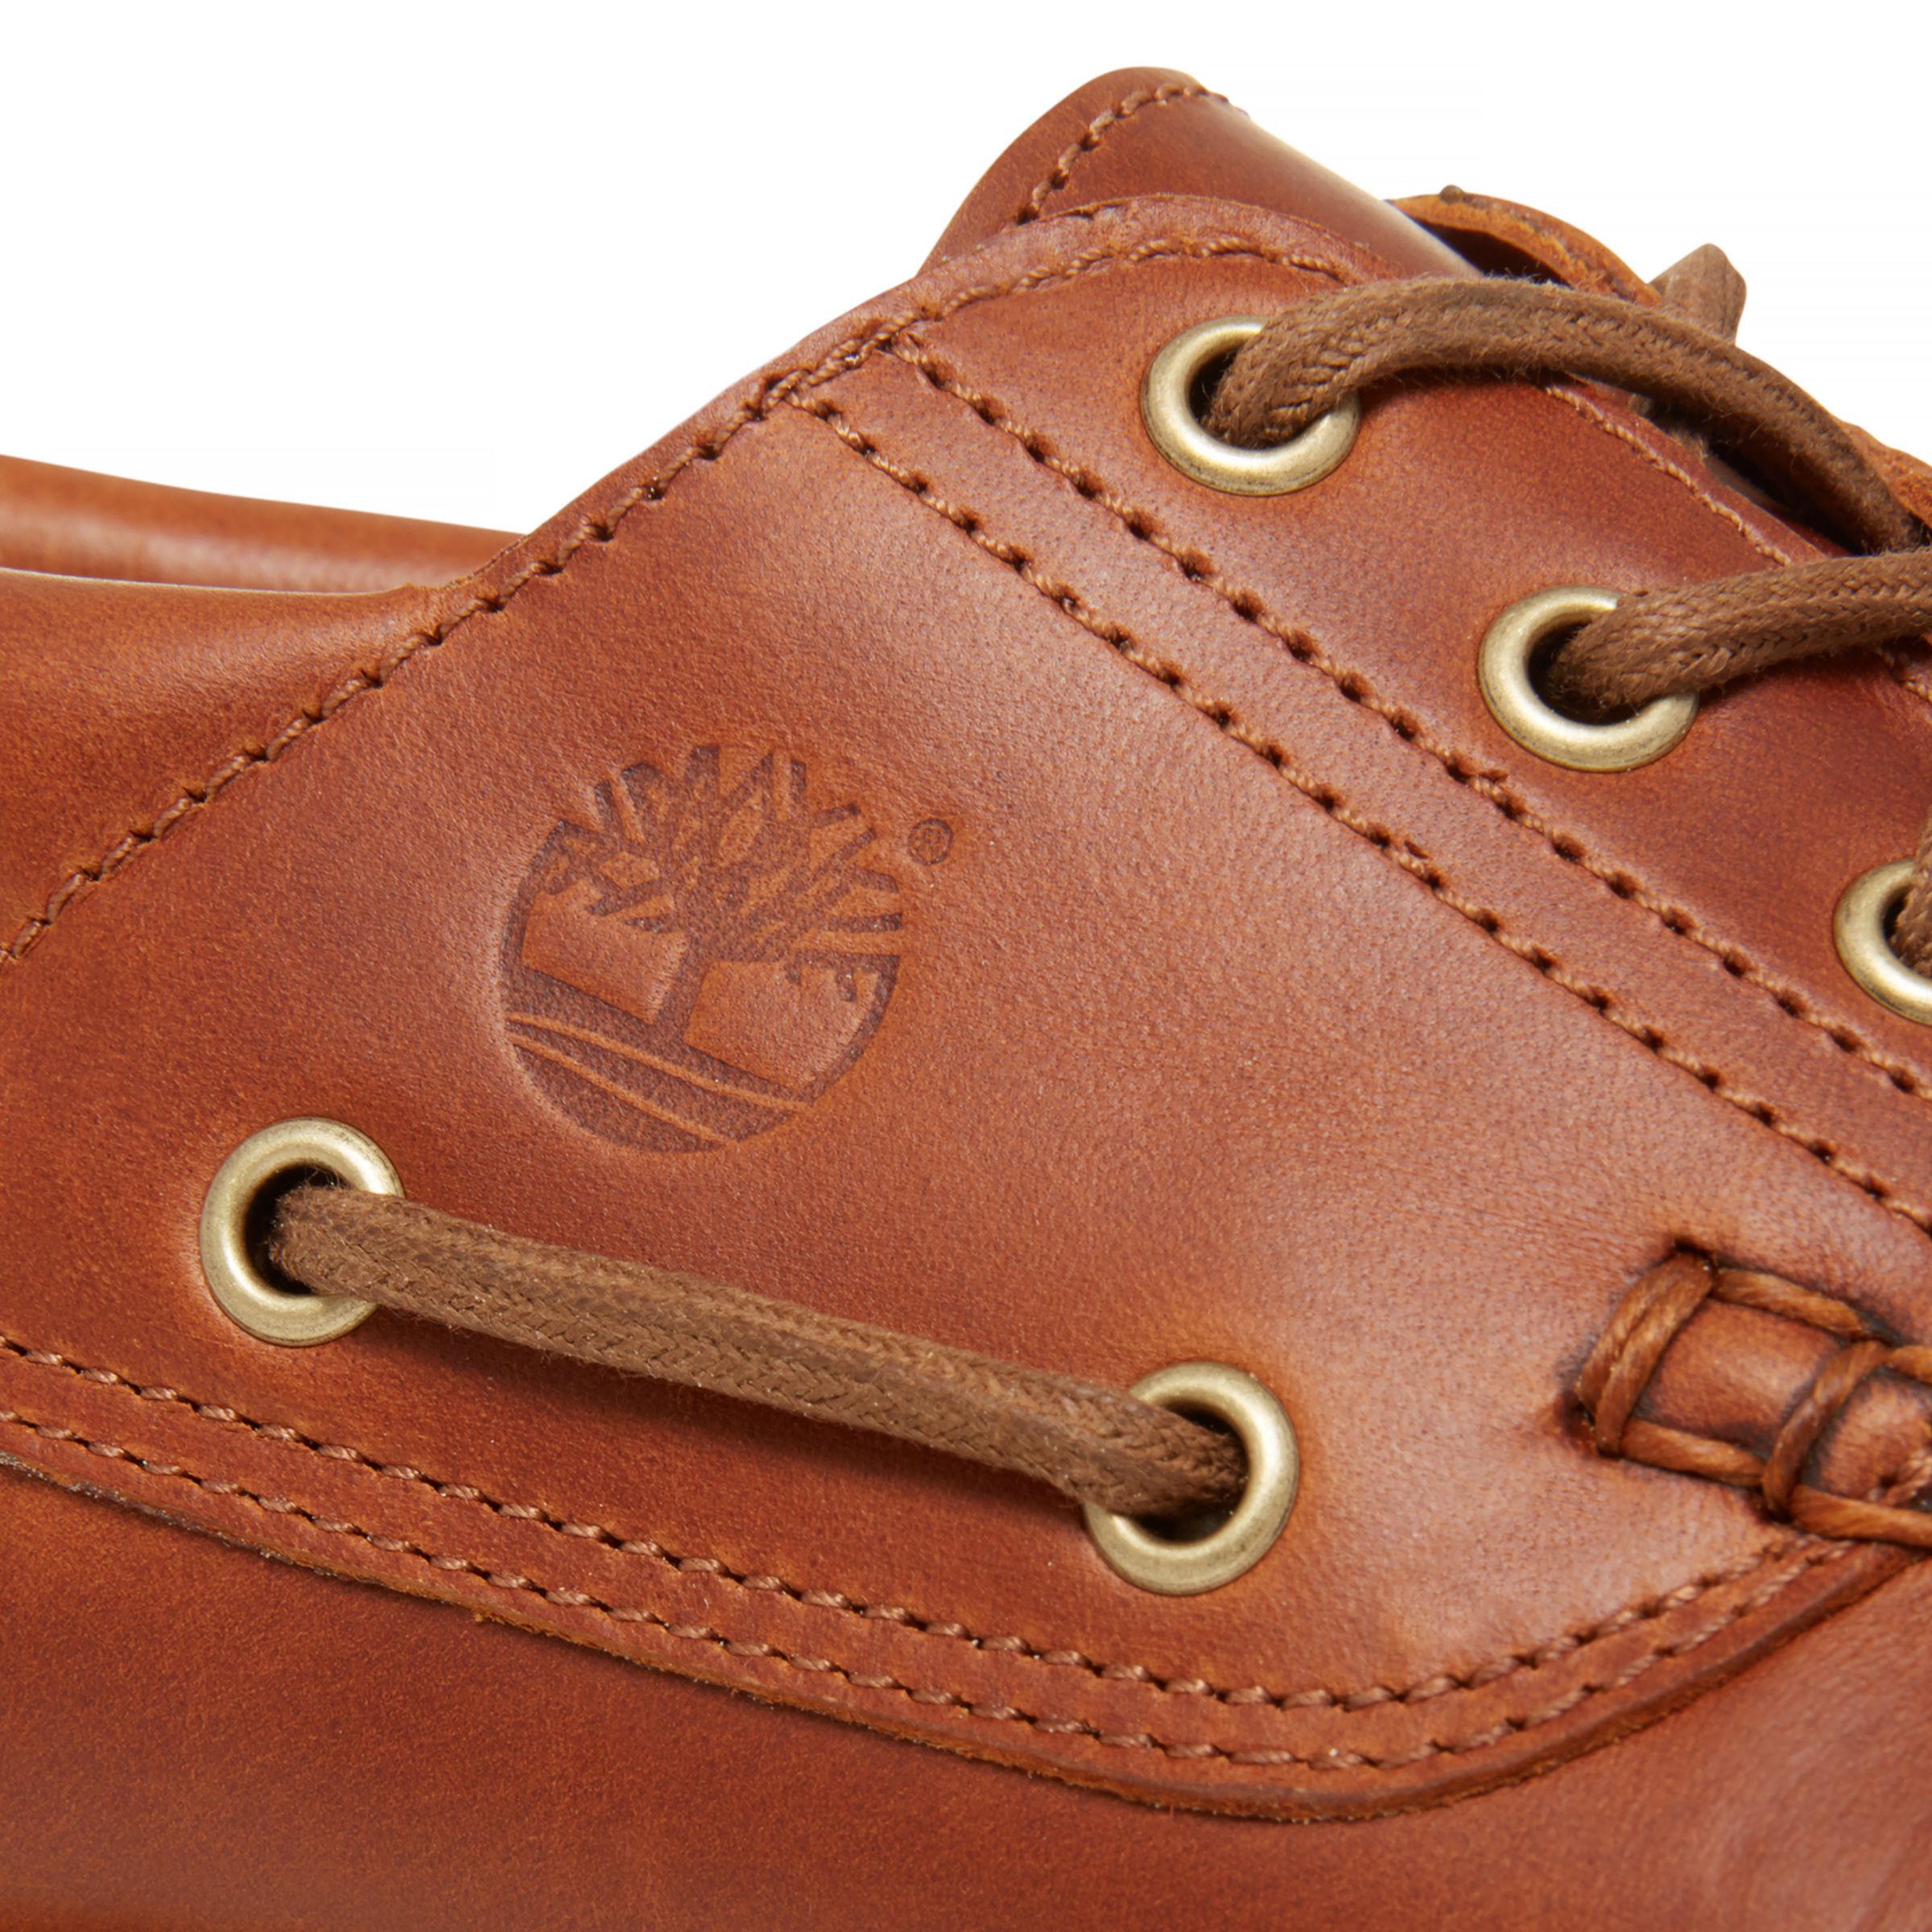 timberland chilmark boat shoes